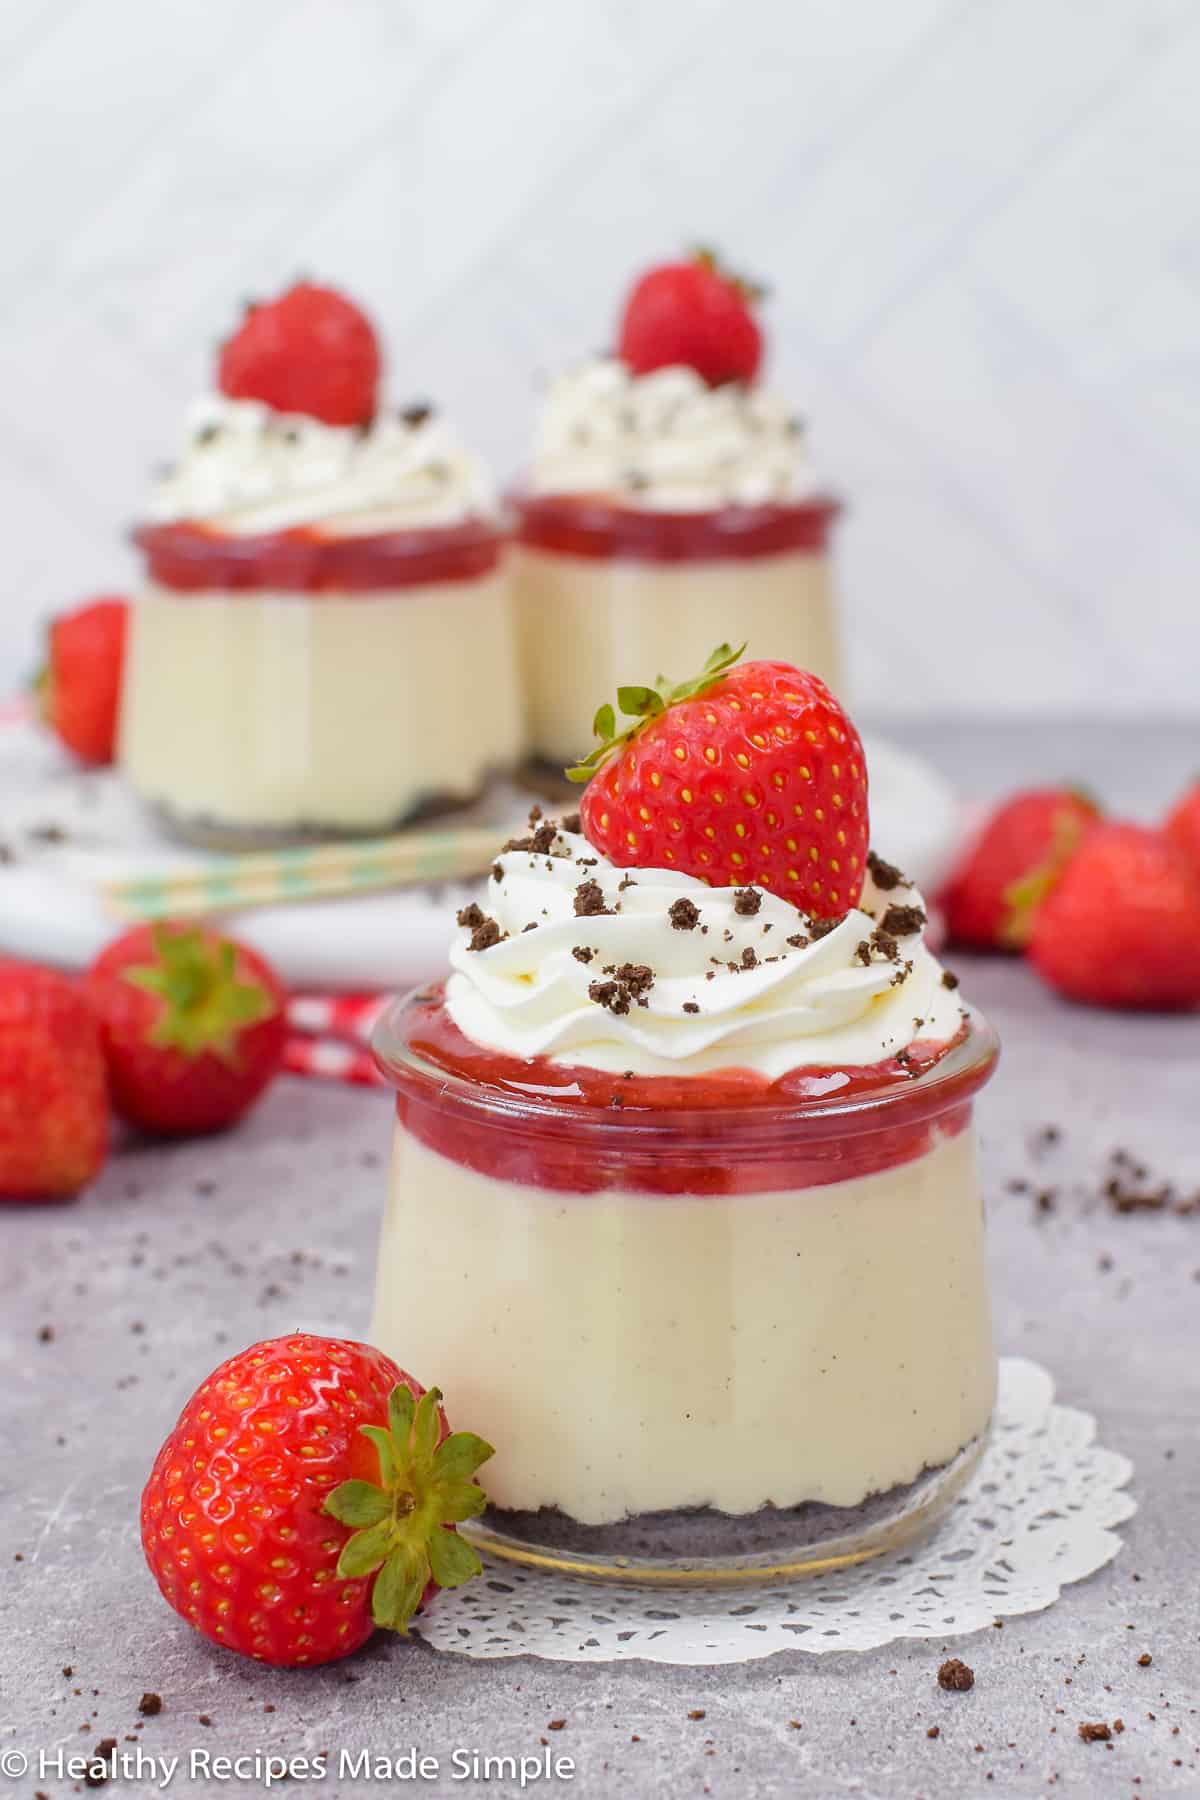 White chocolate pudding cups topped with berries and whipped cream.